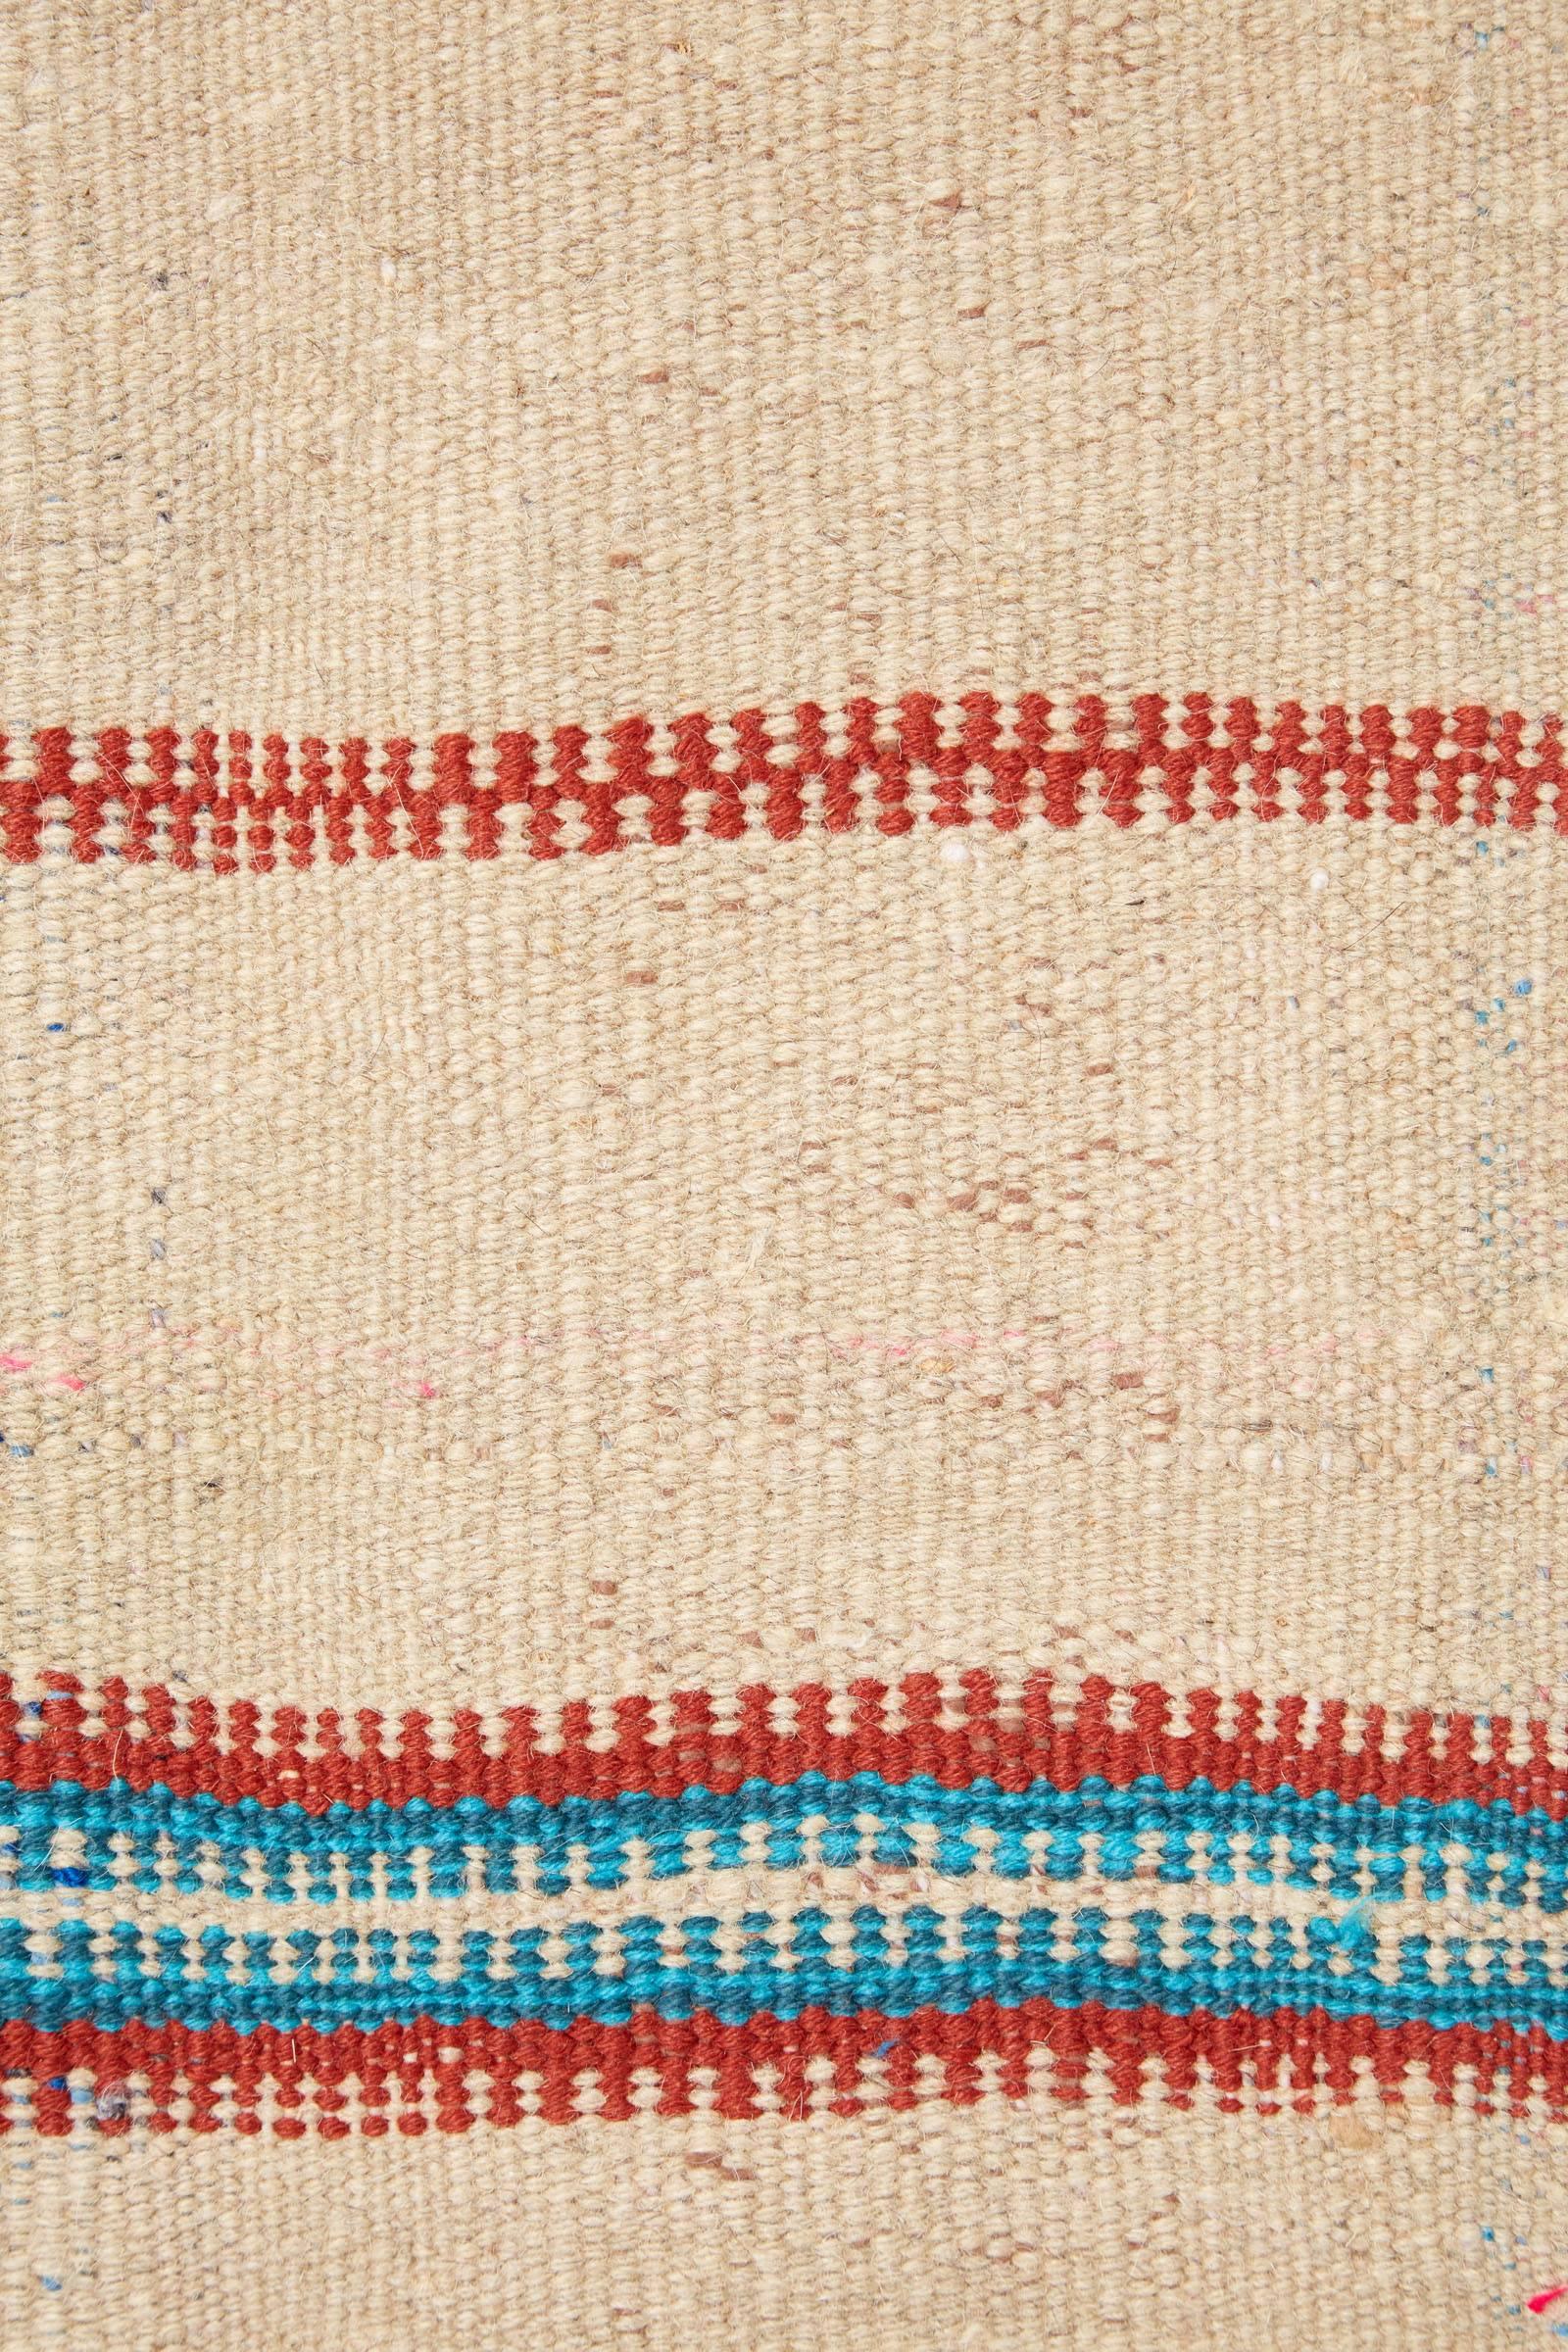 Namibian 20th Century Flat-Weave Berber Rug from Africa